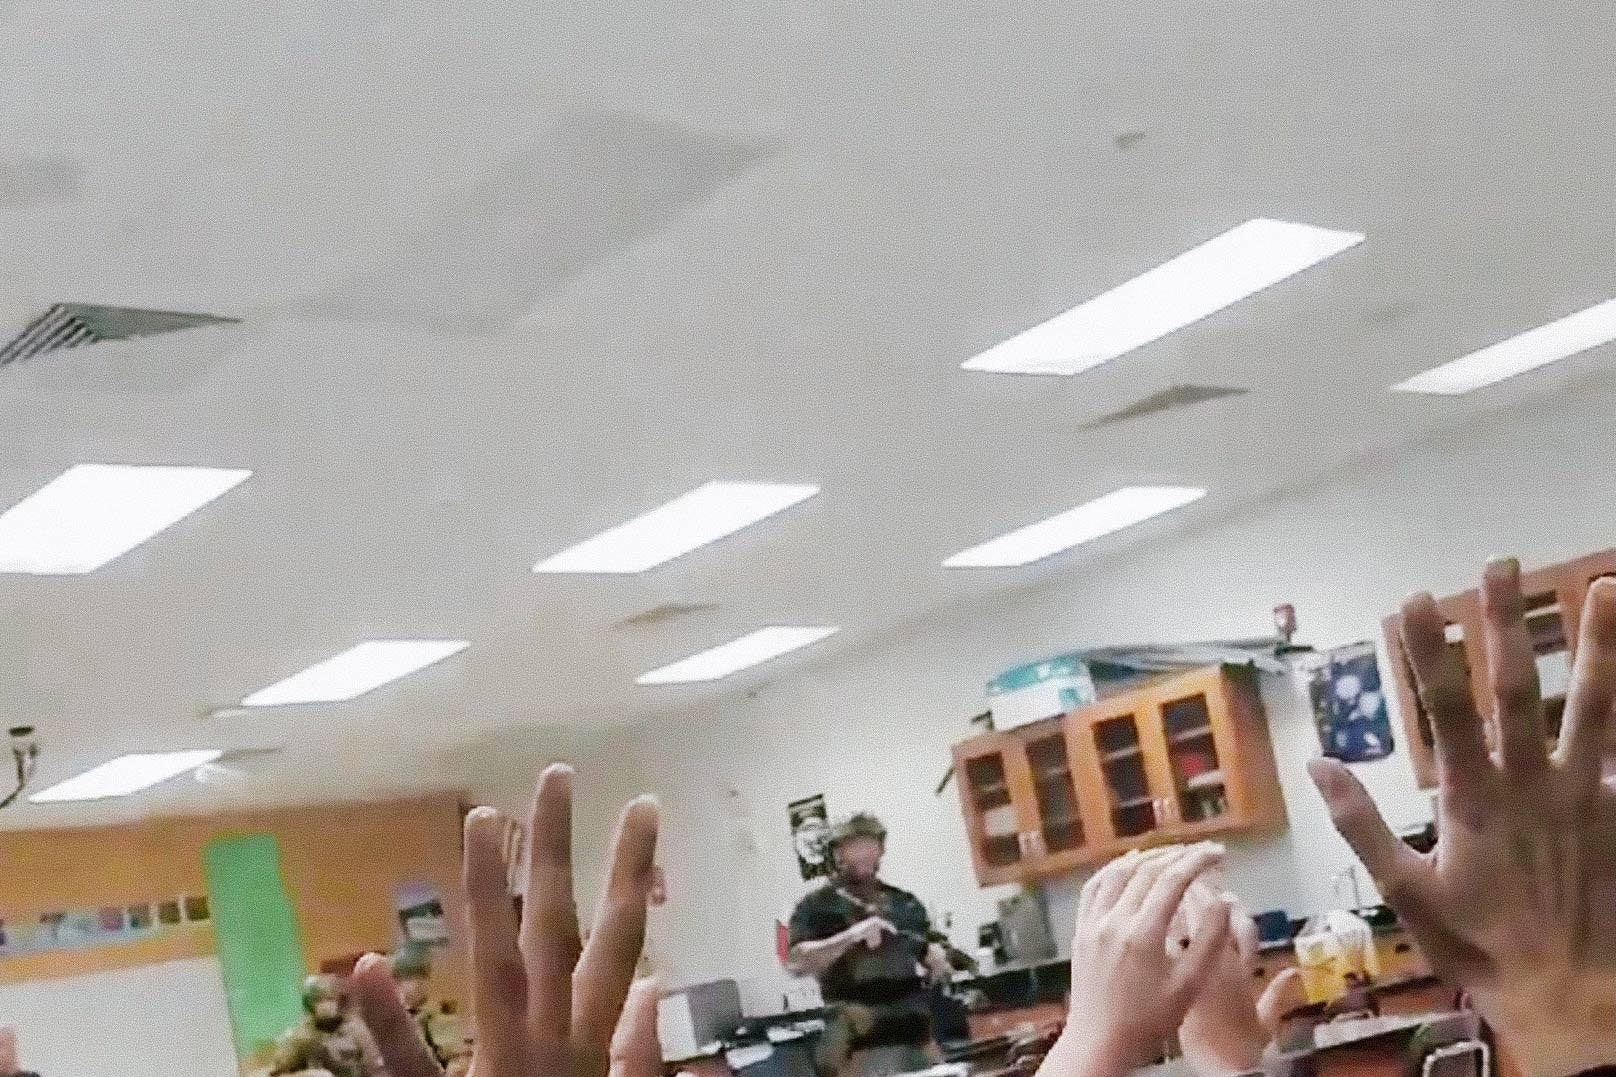 Students put their hands up in the air as armed police enter their classroom, following a shooting at the Marjory Stoneman Douglas High School in Parkland, Florida, in this screengrab taken from a Feb. 14 social media video.